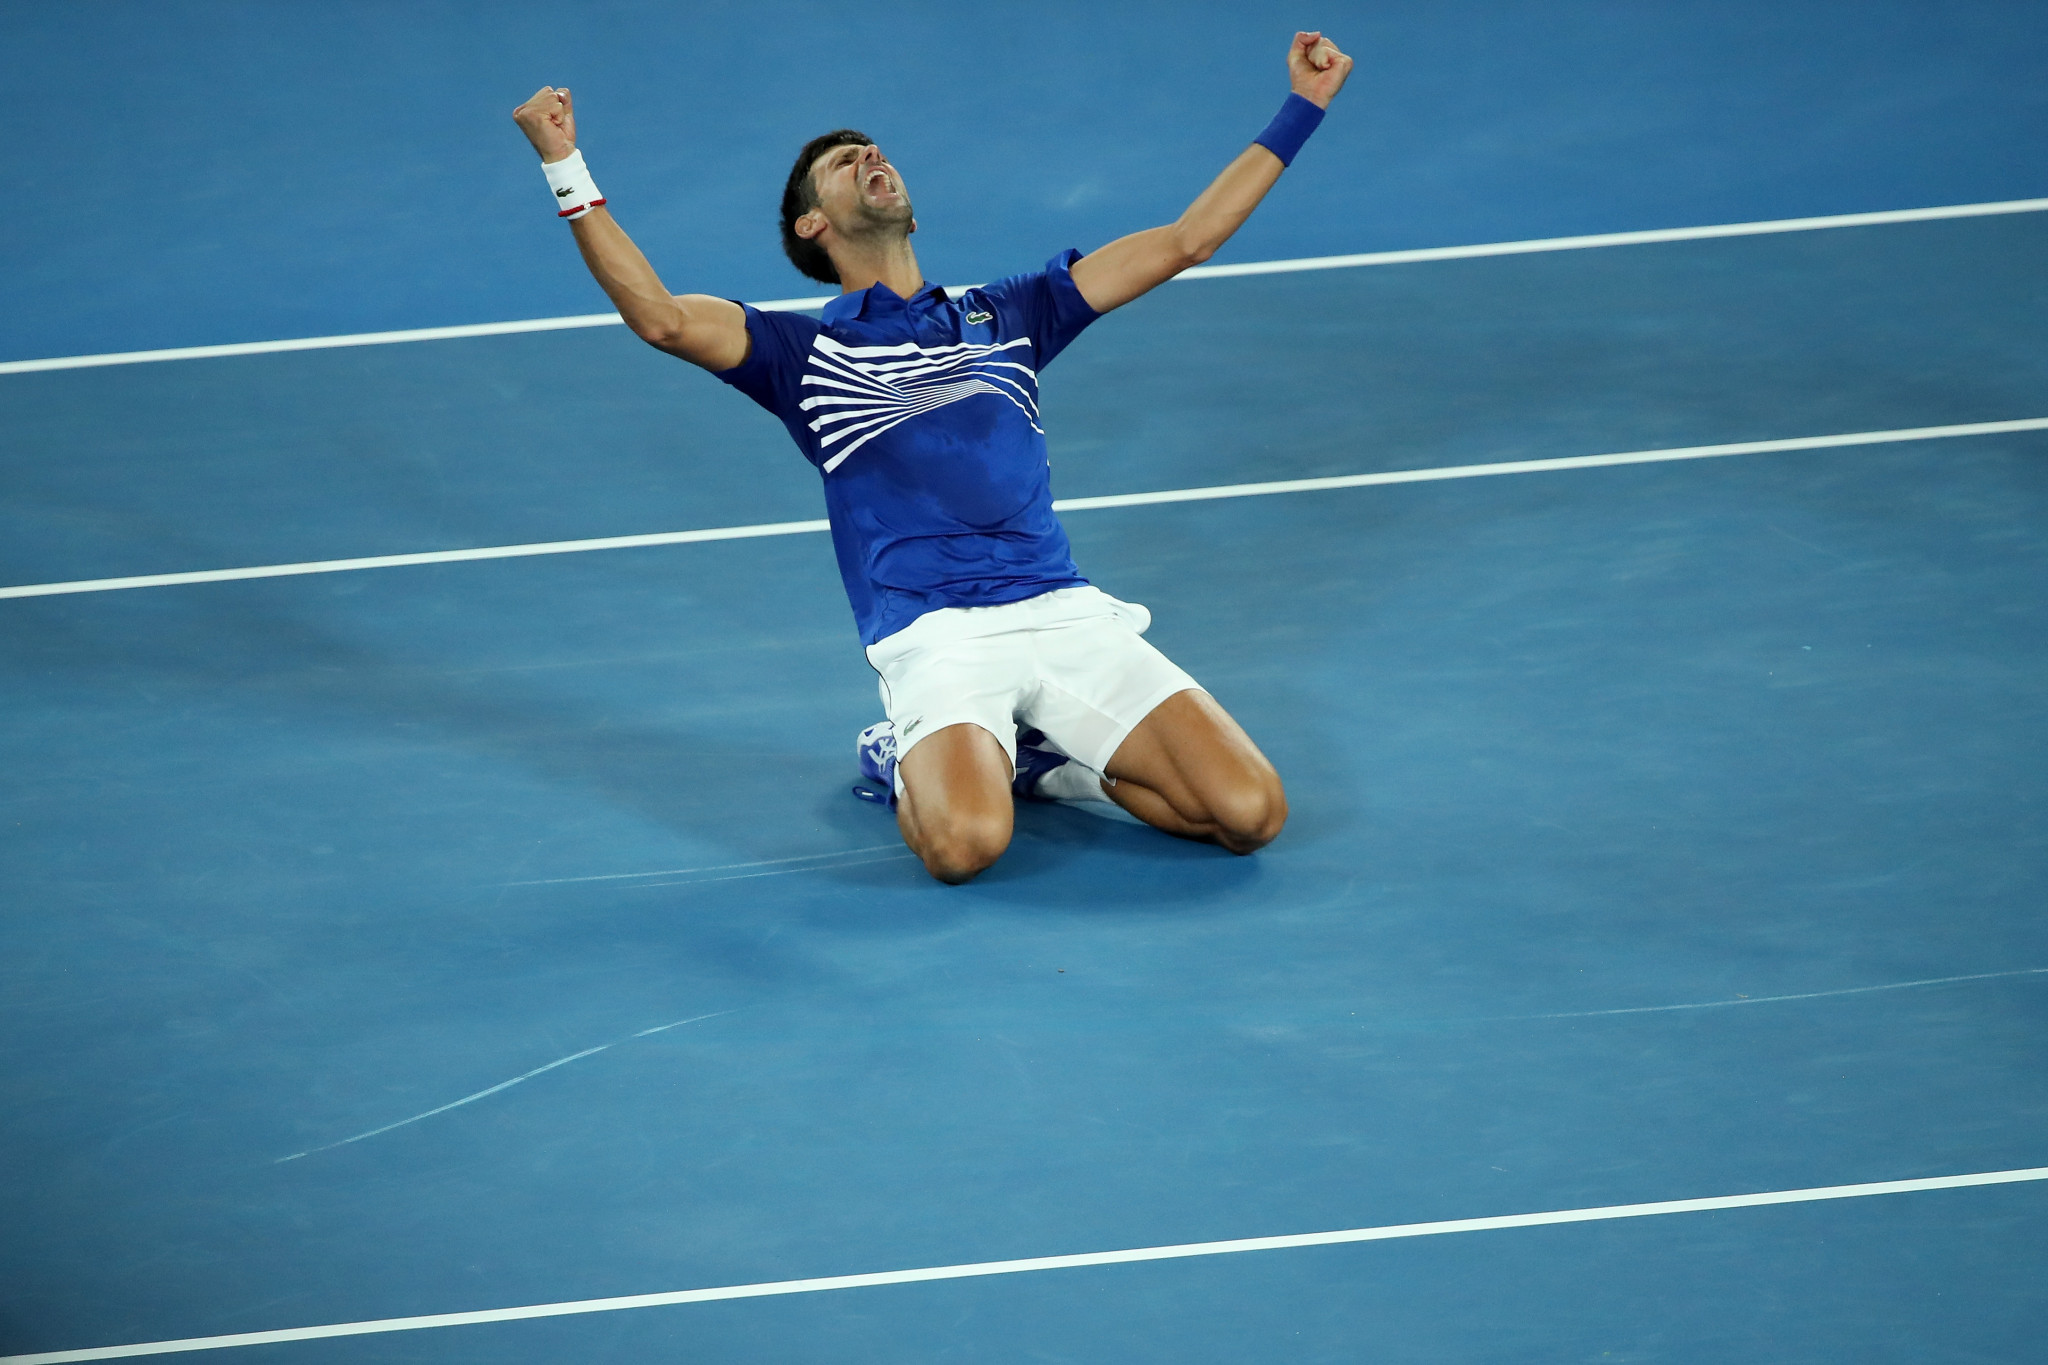 Novak Djokovic beat Rafael Nadal in straight sets to win a record seventh Australian Open ©Getty Images